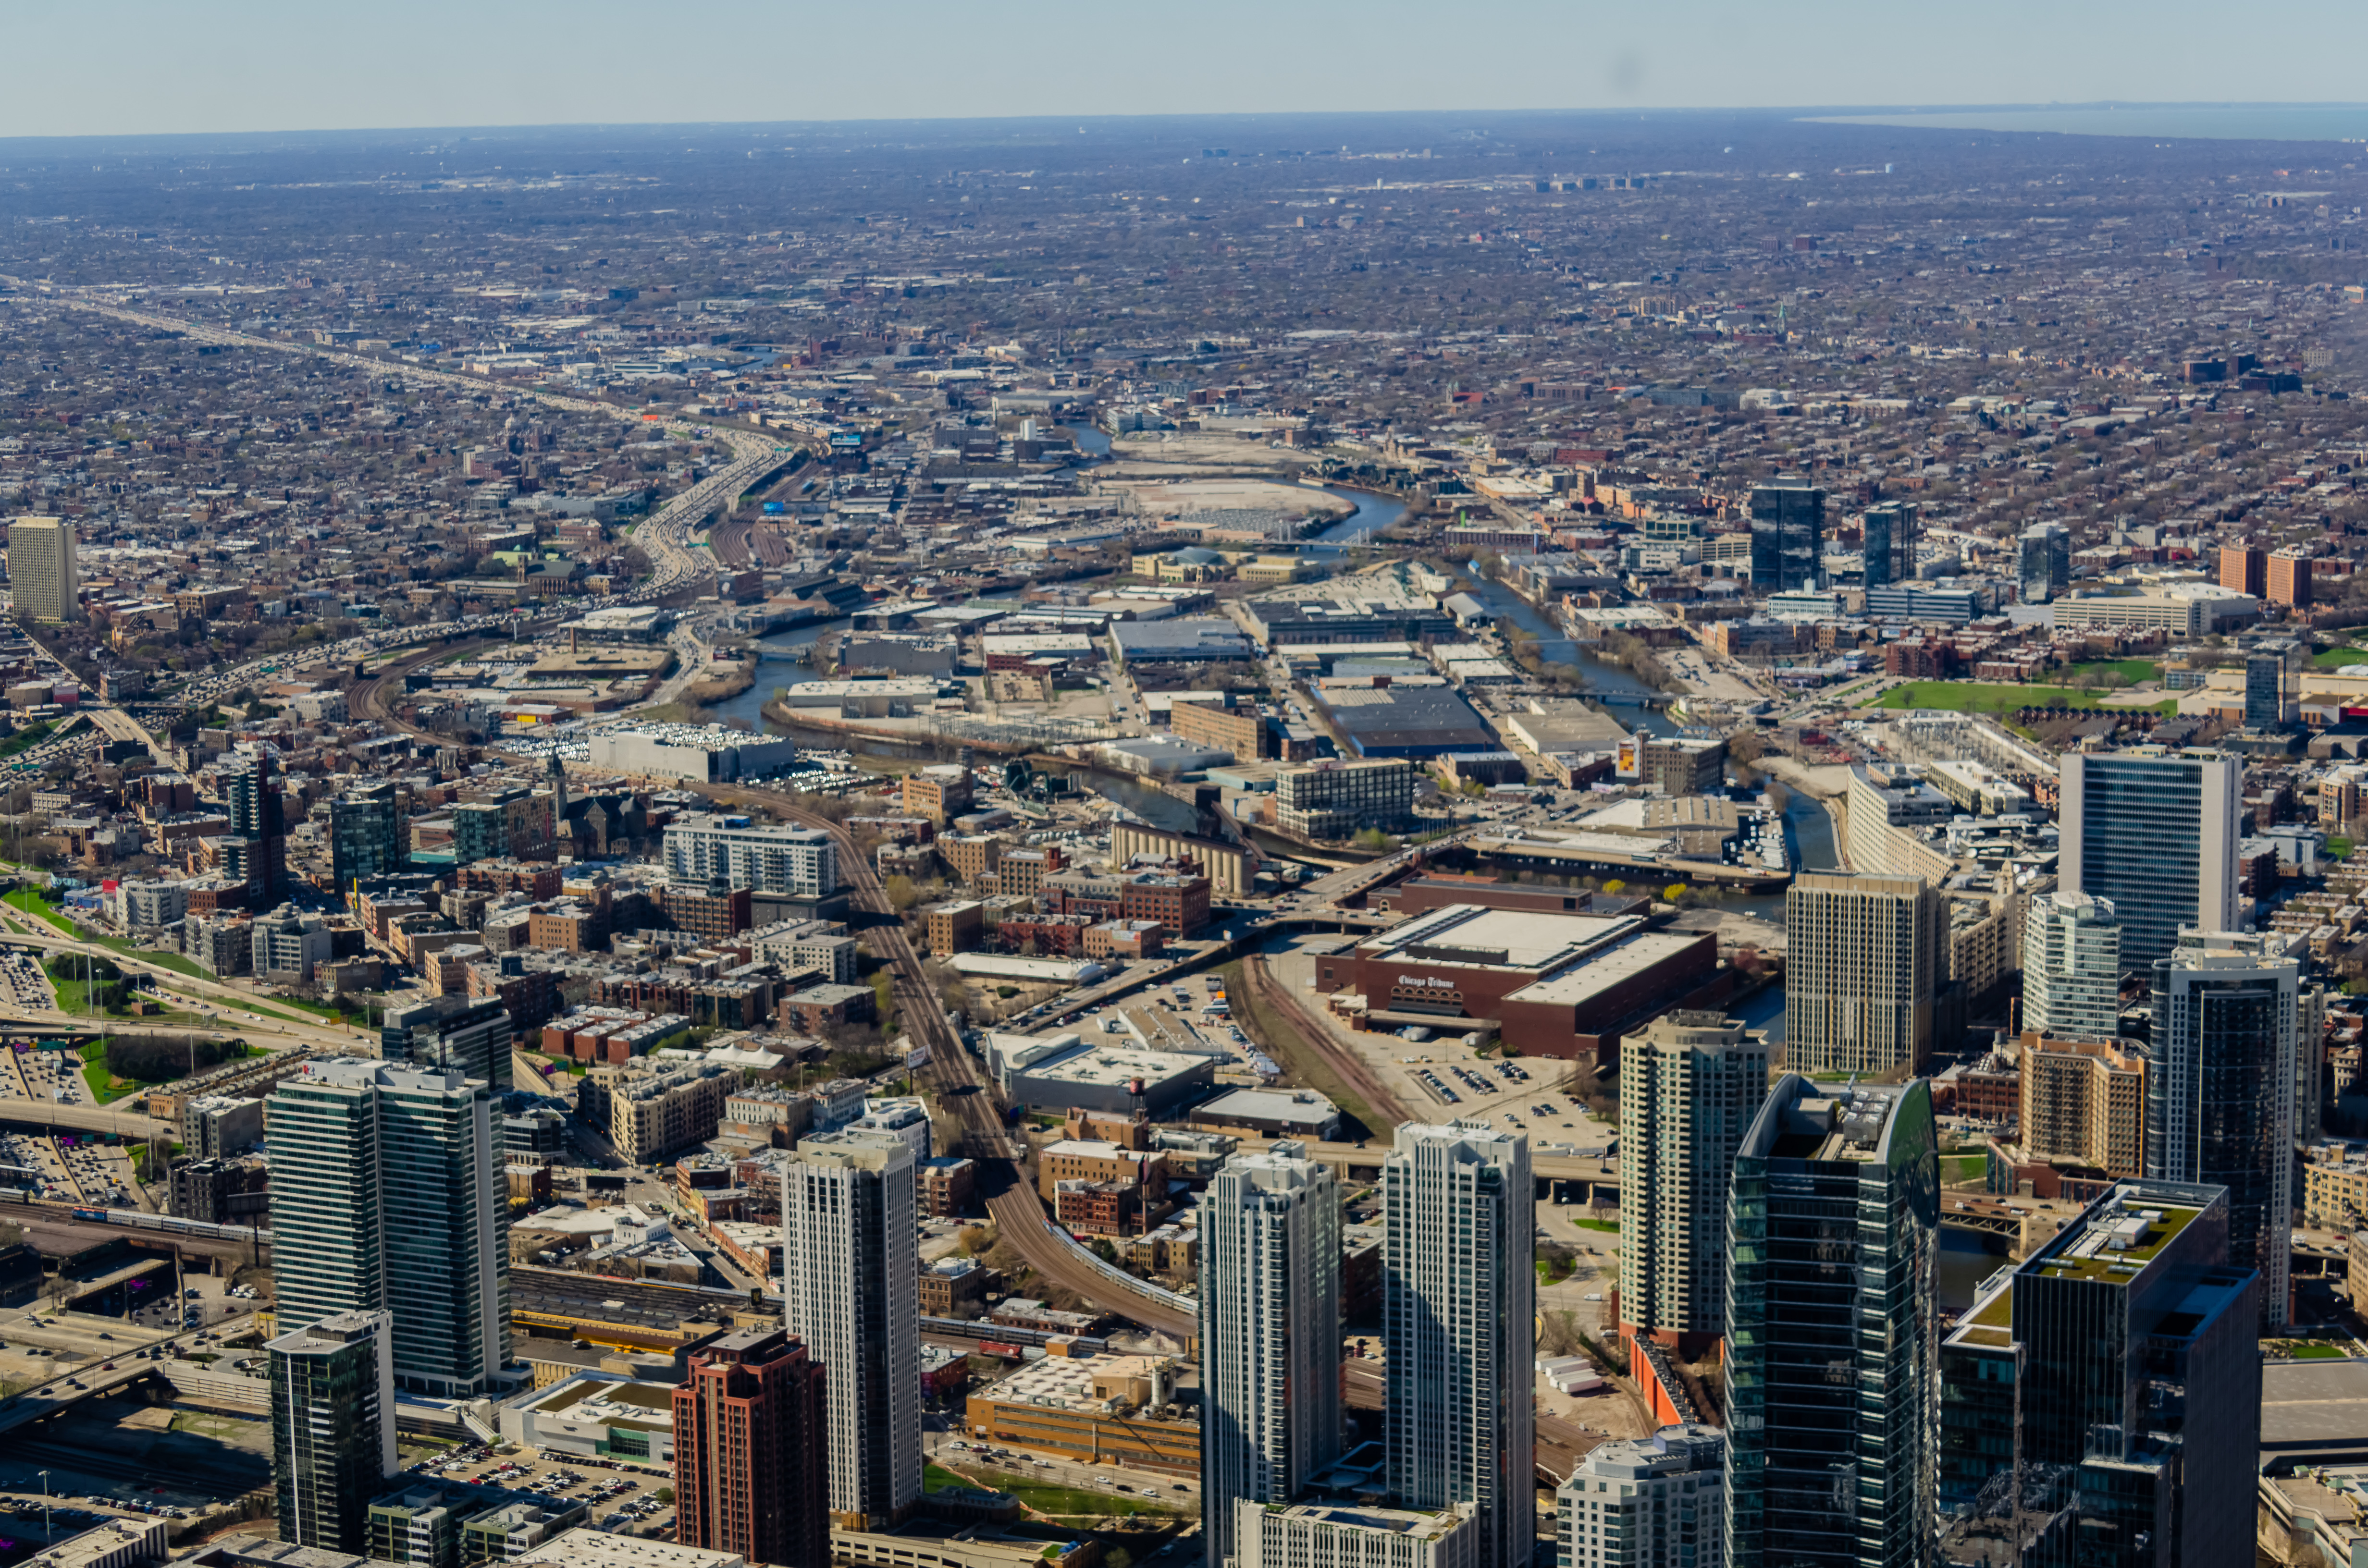 A bird’s eye view of Chicago shows the confluence of the river, a few towers on the west end of the Loop, and smaller buildings of neighborhoods.